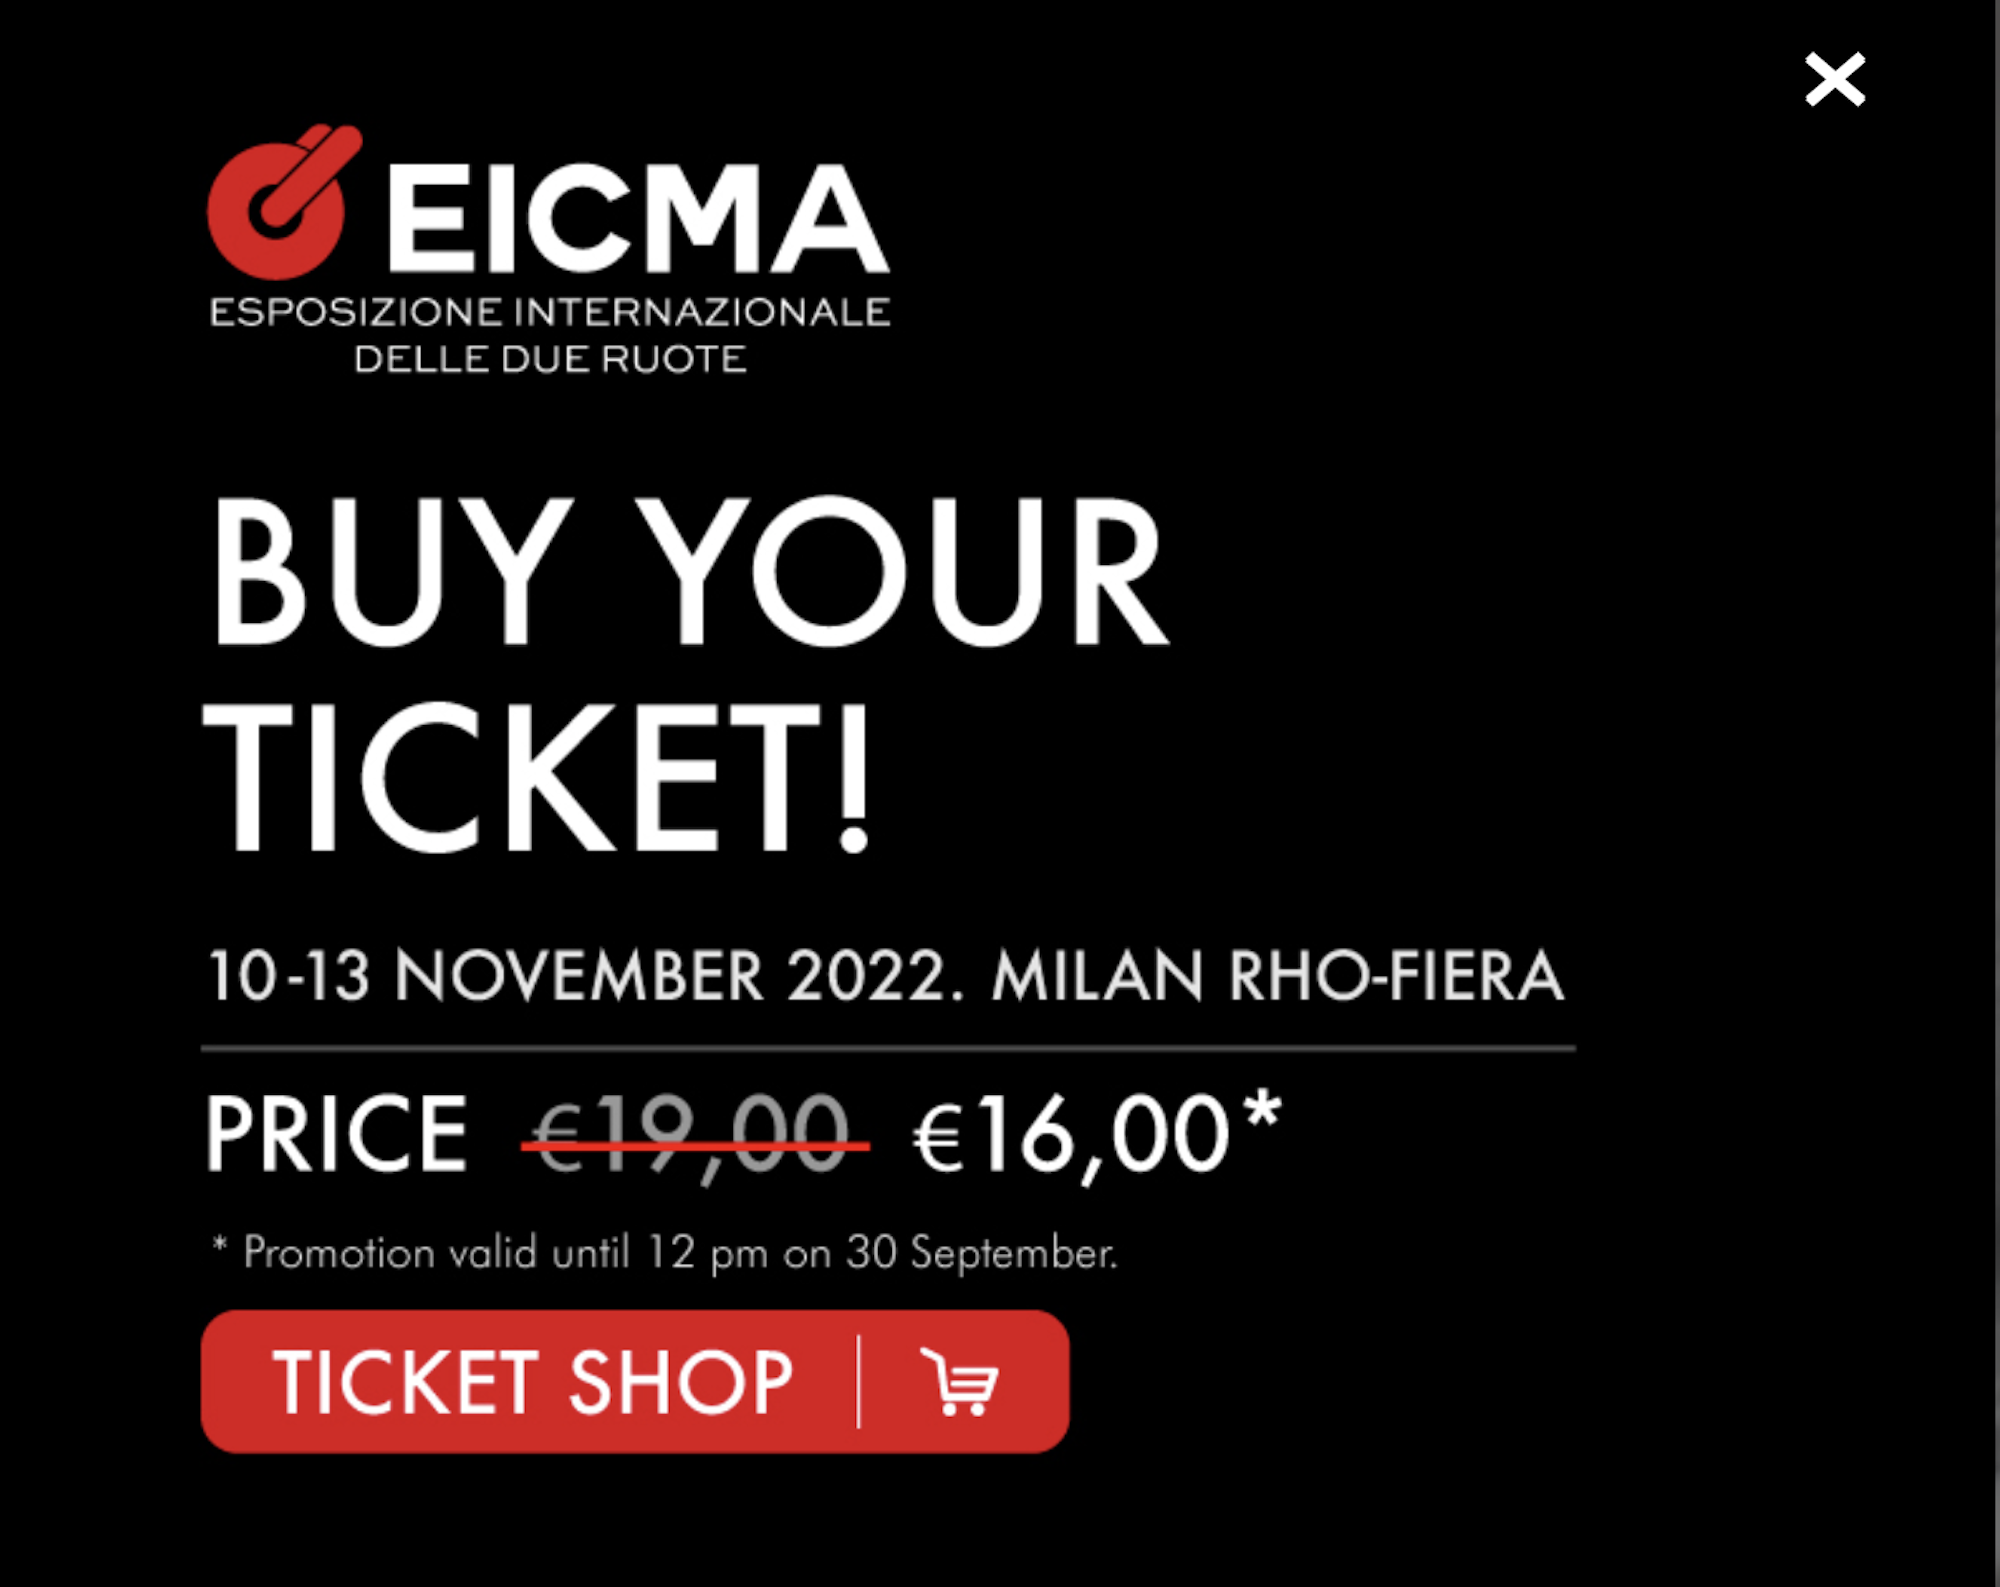 EICMA's tickets are on sale until the end of September! Media sourced from EICMA. 